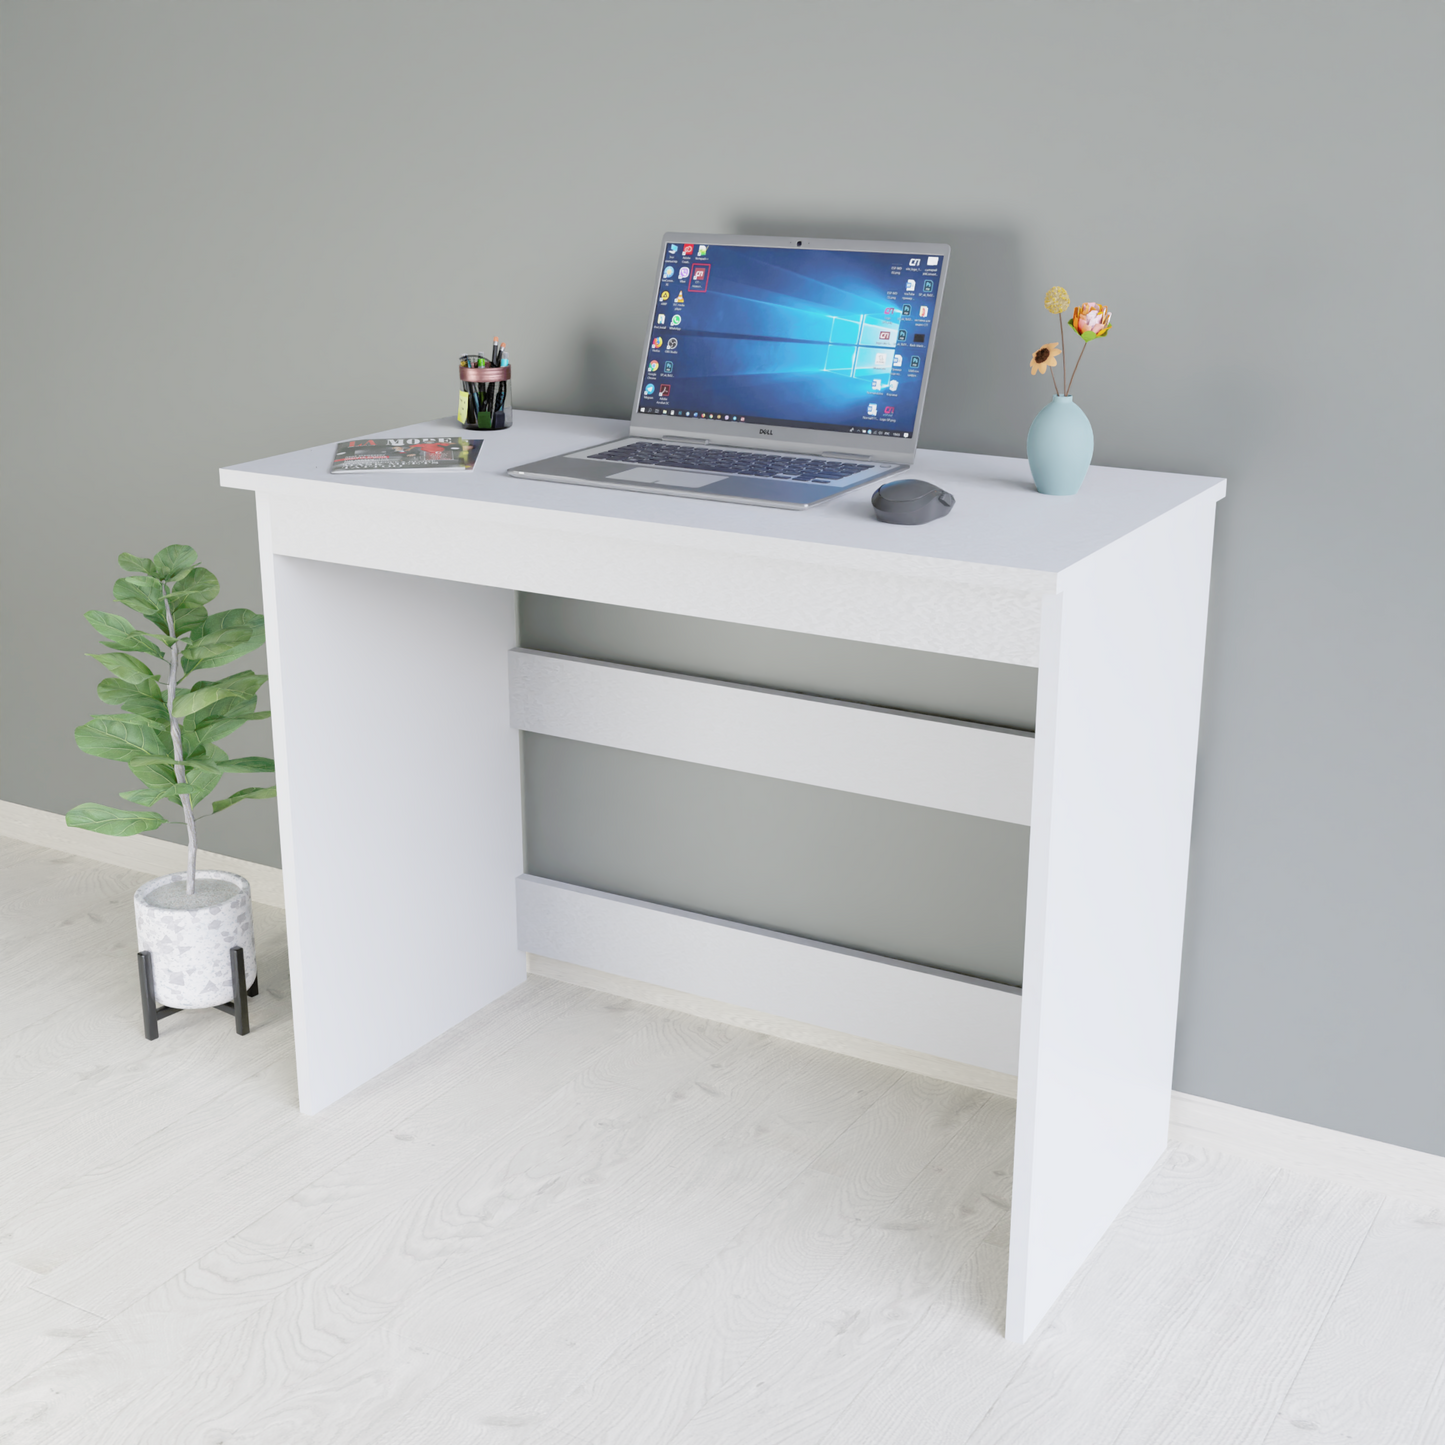 Flyn Study Table ( Matte Finish)